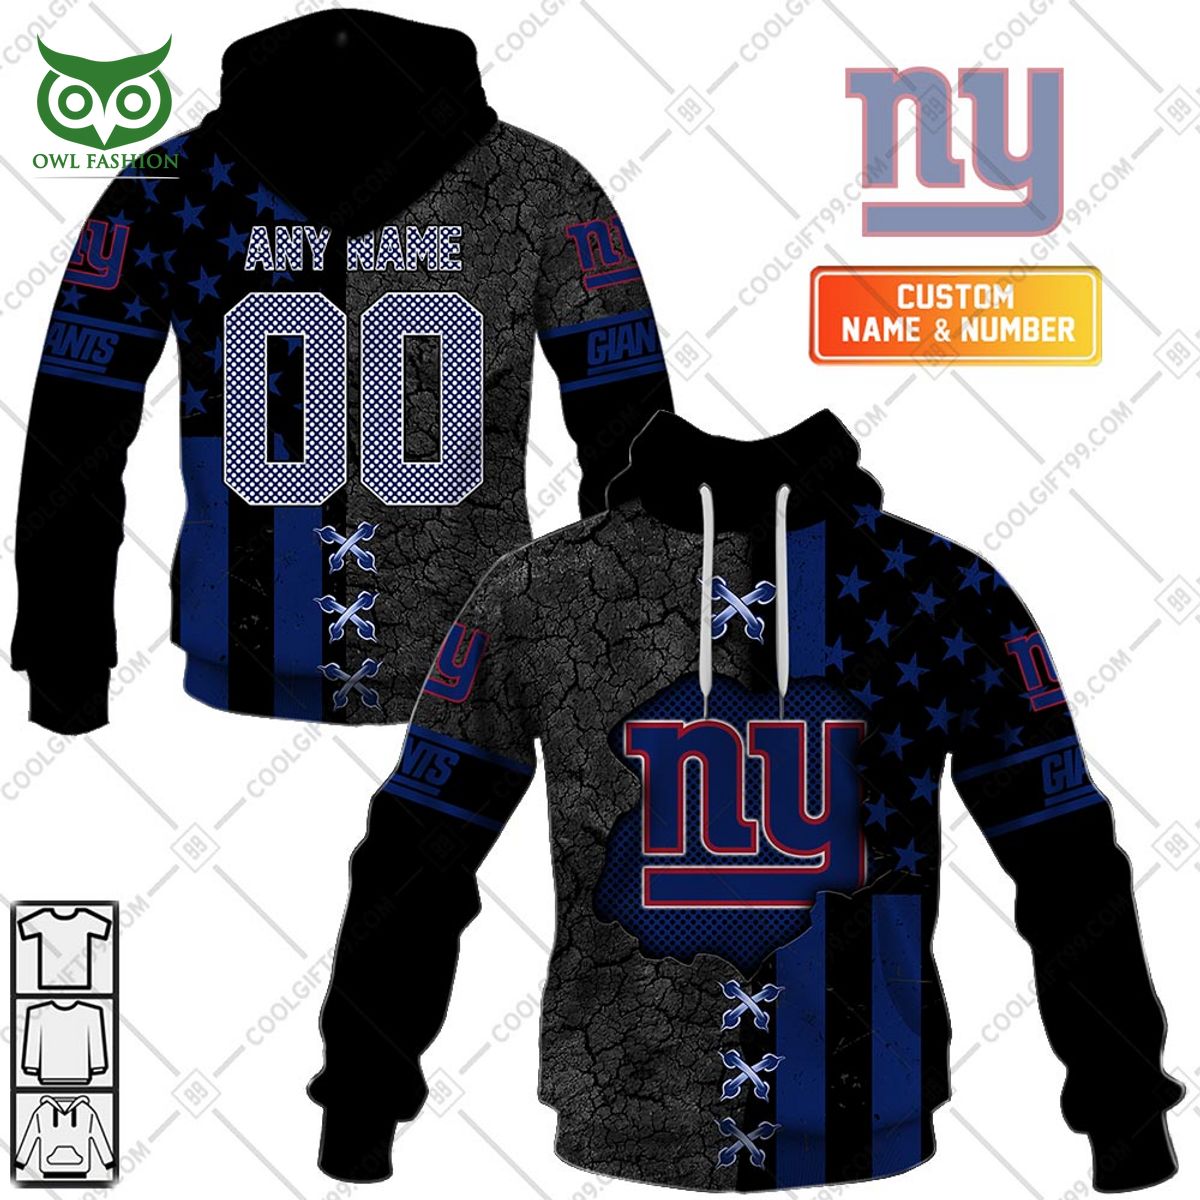 New York Giants NFL personalized hoodie shirt printed